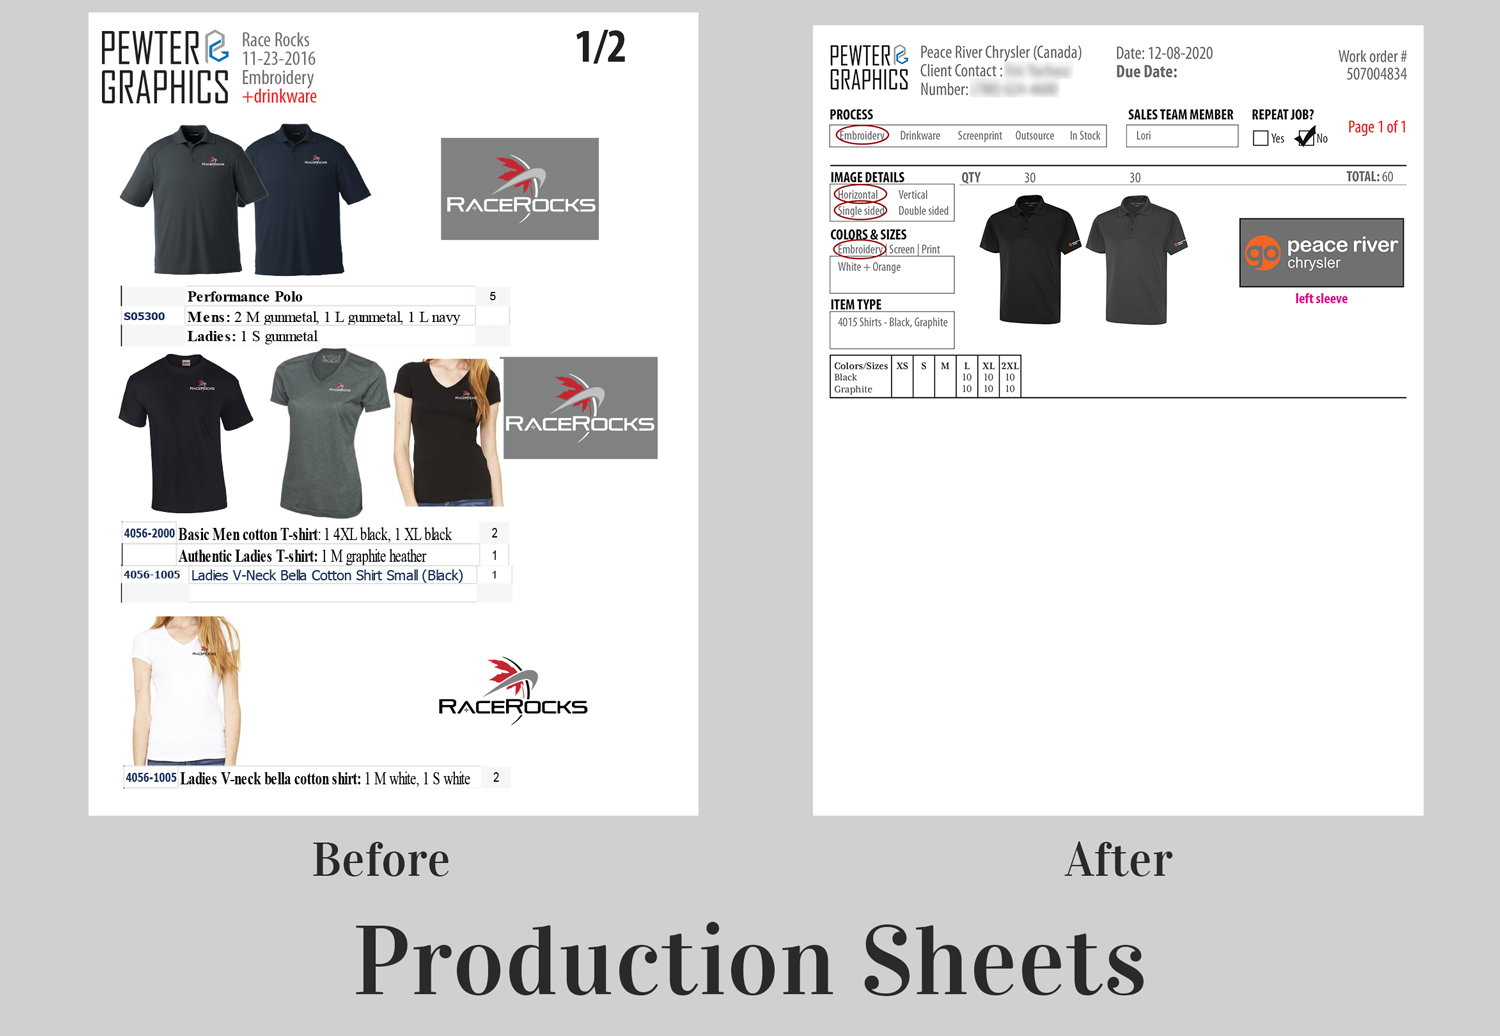 Production Sheet Before & After